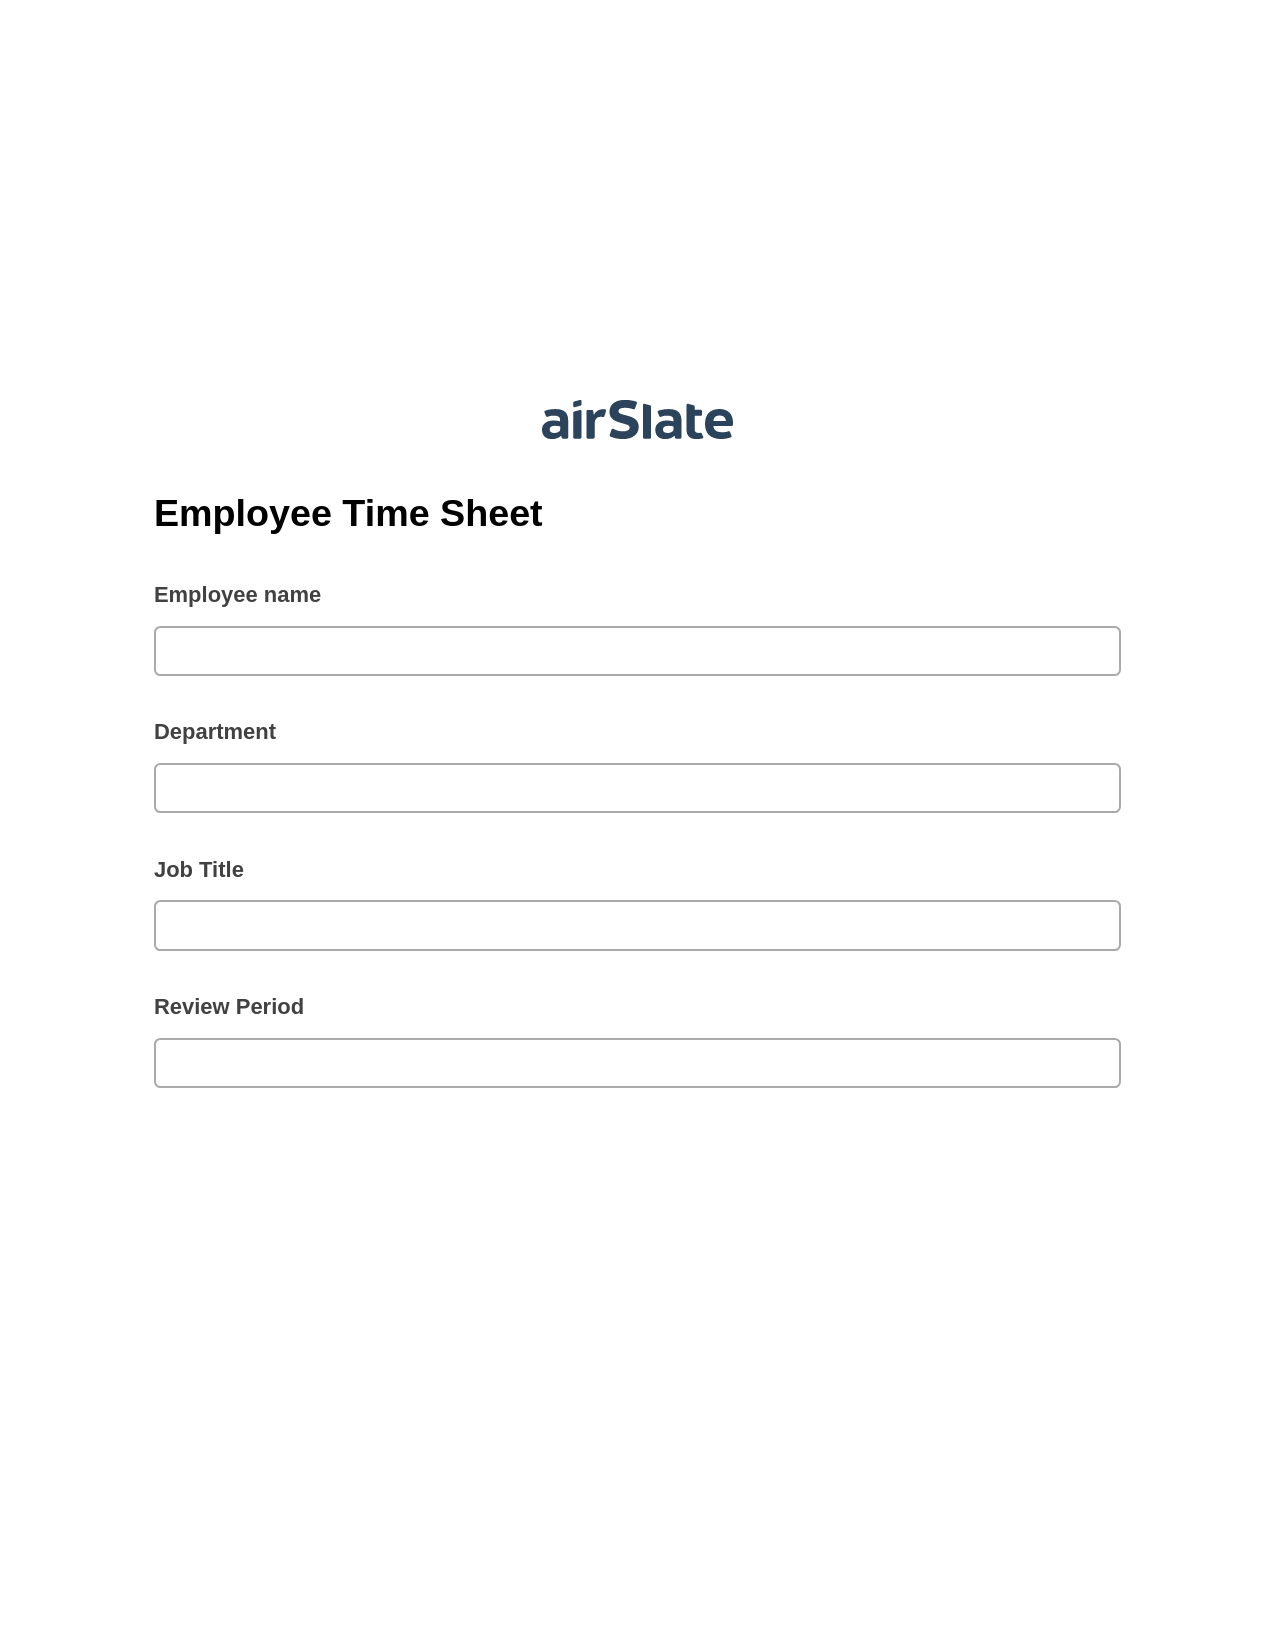 Employee Time Sheet Pre-fill from MS Dynamics 365 Records, Send Mailchimp Campaign Bot, Export to WebMerge Bot